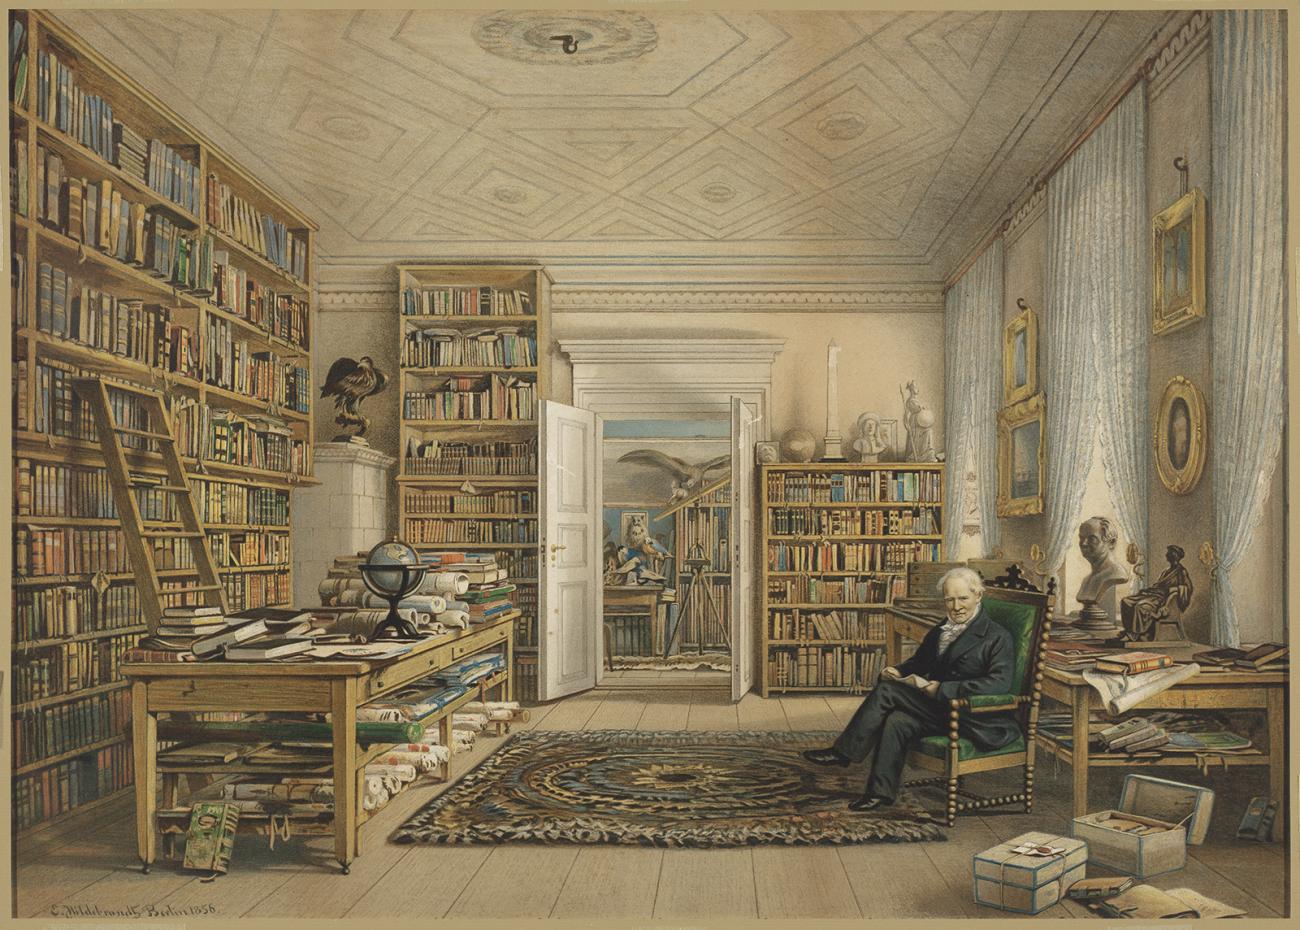 a picture of a library in muted, golden tones, with one figure seated